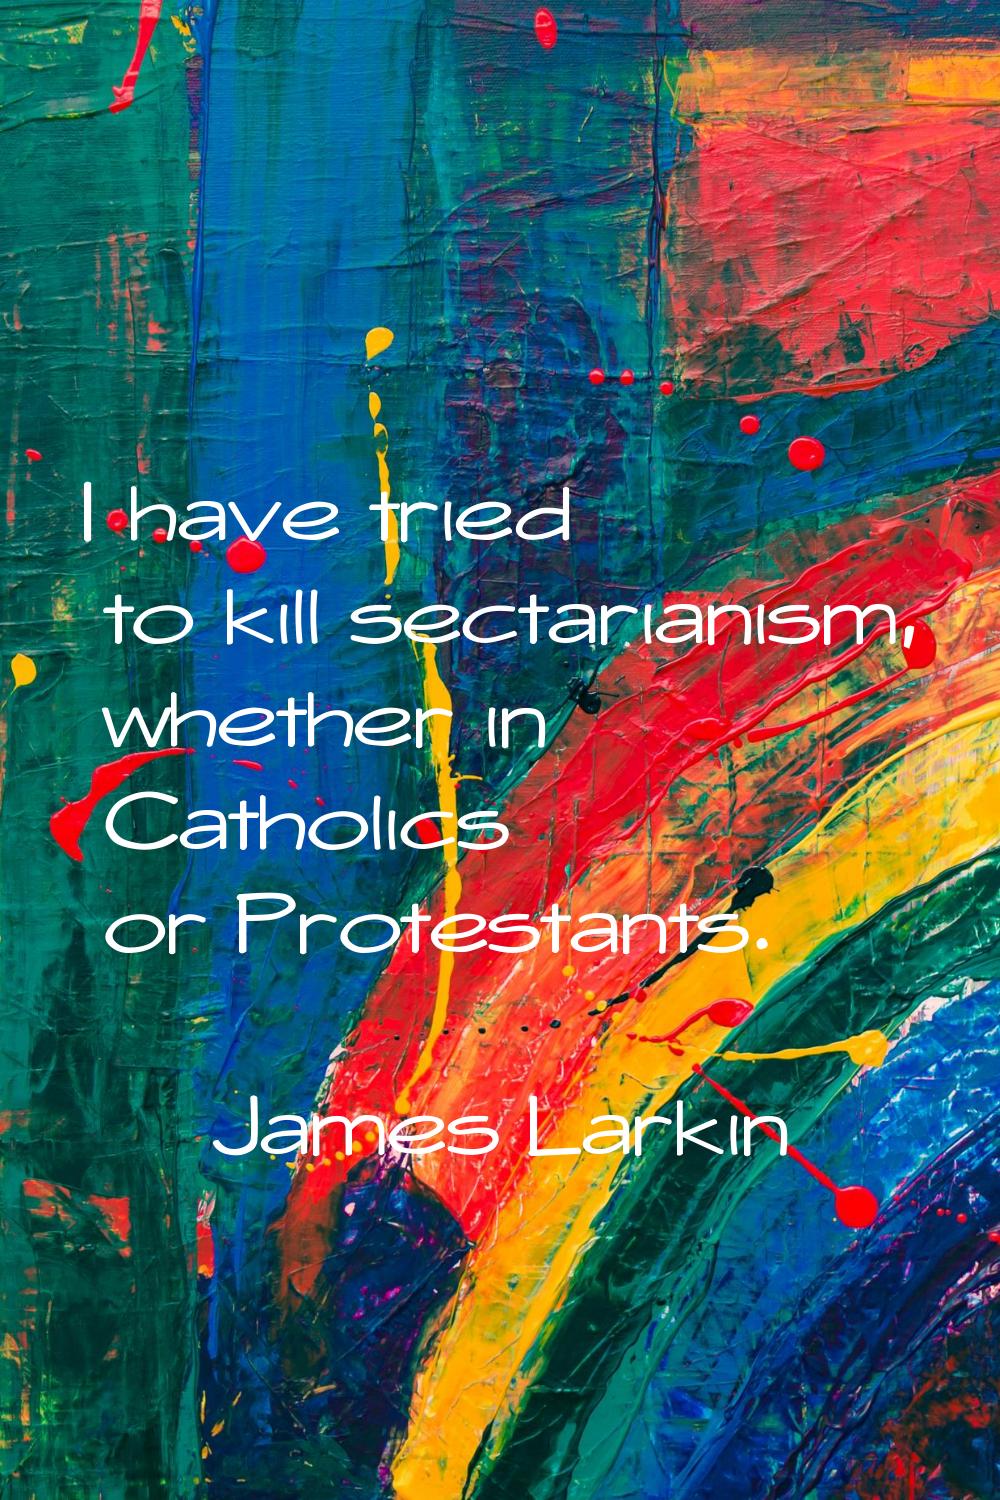 I have tried to kill sectarianism, whether in Catholics or Protestants.